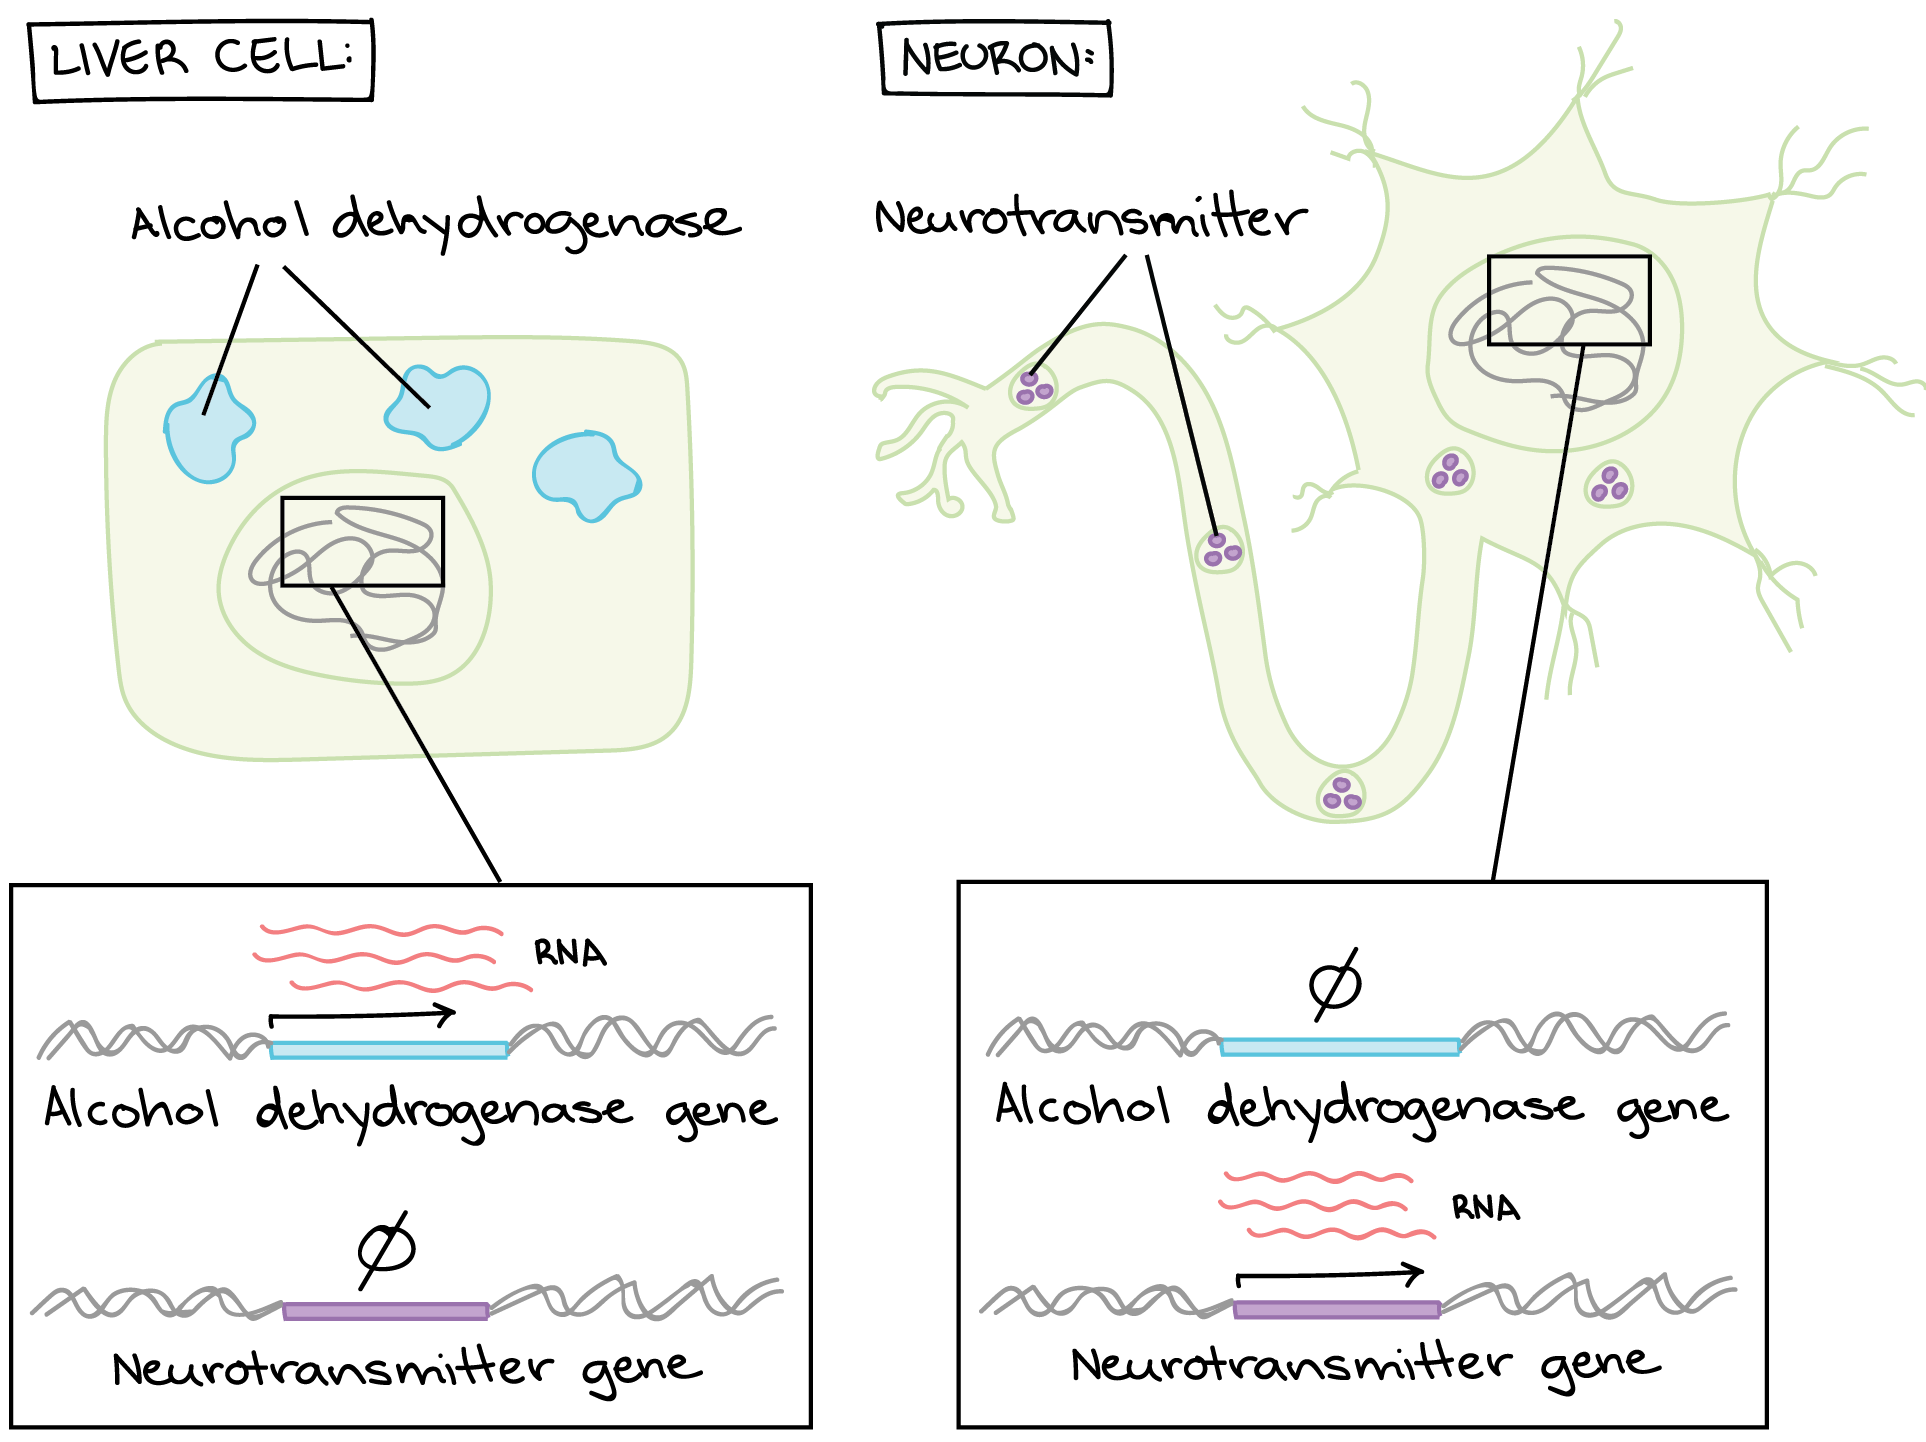 Left panel: liver cell. The liver cell contains alcohol dehydrogenase proteins. If we look in the nucleus, we see that an alcohol dehydrogenase gene is expressed to make RNA, while a neurotransmitter gene is not. The RNA is processed and translated, which is why the alcohol dehydrogenase proteins are found in the cell.

Right panel: neuron. The neuron contains neurotransmitter proteins. If we look in the nucleus, we see that the alcohol dehydrogenase gene is not expressed to make RNA, while the neurotransmitter gene is. The RNA is processed and translated, which is why the neurotransmitter proteins are found in the cell.